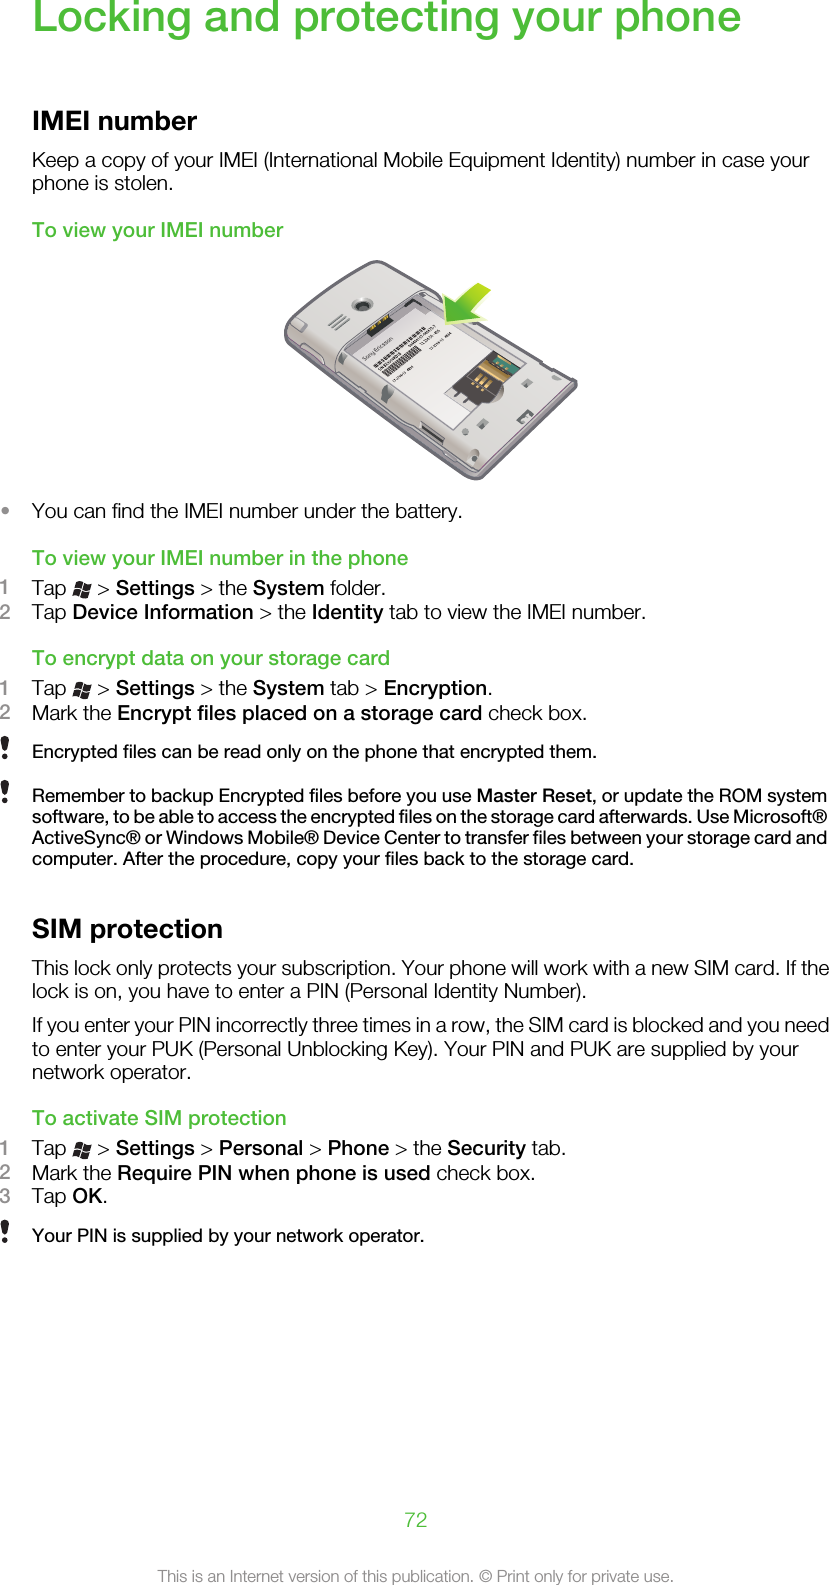 Locking and protecting your phoneIMEI numberKeep a copy of your IMEI (International Mobile Equipment Identity) number in case yourphone is stolen.To view your IMEI number•You can find the IMEI number under the battery.To view your IMEI number in the phone1Tap   &gt; Settings &gt; the System folder.2Tap Device Information &gt; the Identity tab to view the IMEI number.To encrypt data on your storage card1Tap   &gt; Settings &gt; the System tab &gt; Encryption.2Mark the Encrypt files placed on a storage card check box.Encrypted files can be read only on the phone that encrypted them.Remember to backup Encrypted files before you use Master Reset, or update the ROM systemsoftware, to be able to access the encrypted files on the storage card afterwards. Use Microsoft®ActiveSync® or Windows Mobile® Device Center to transfer files between your storage card andcomputer. After the procedure, copy your files back to the storage card.SIM protectionThis lock only protects your subscription. Your phone will work with a new SIM card. If thelock is on, you have to enter a PIN (Personal Identity Number).If you enter your PIN incorrectly three times in a row, the SIM card is blocked and you needto enter your PUK (Personal Unblocking Key). Your PIN and PUK are supplied by yournetwork operator.To activate SIM protection1Tap   &gt; Settings &gt; Personal &gt; Phone &gt; the Security tab.2Mark the Require PIN when phone is used check box.3Tap OK.Your PIN is supplied by your network operator.72This is an Internet version of this publication. © Print only for private use.